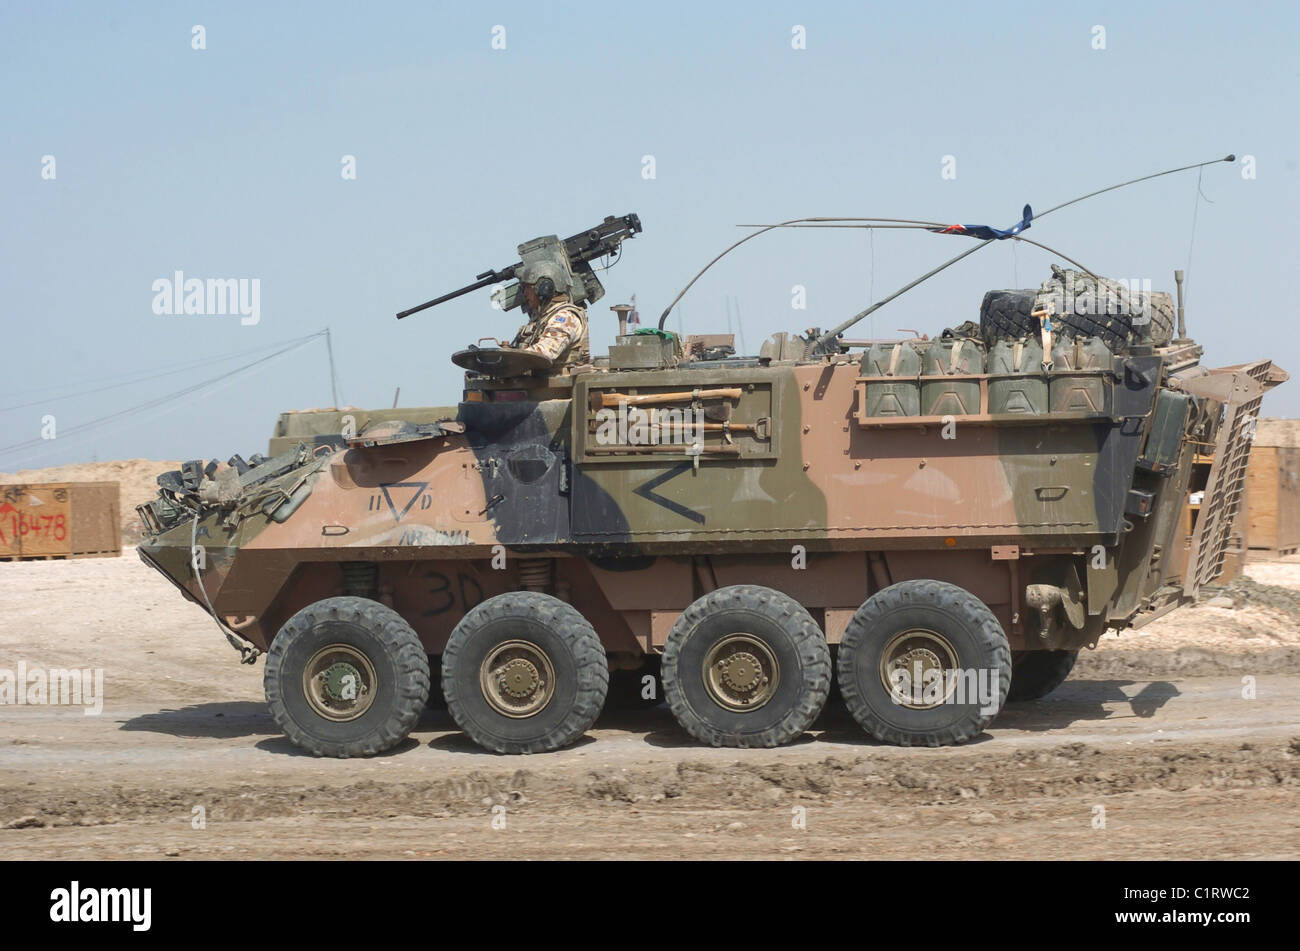 A LAV III infantry fighting vehicle in Afghanistan. Stock Photo